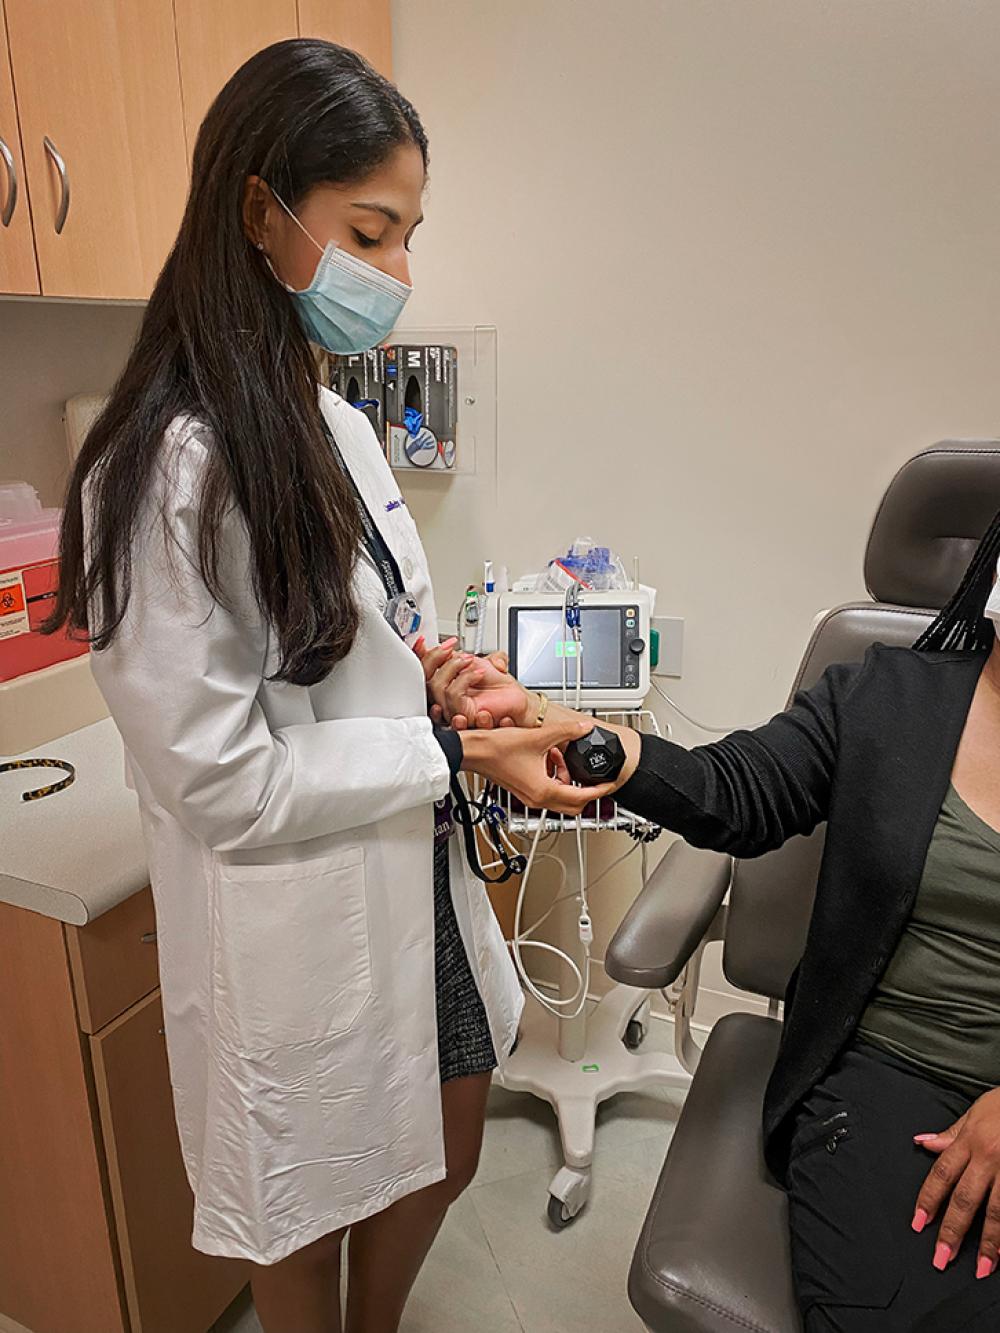 Dr. Juhi Purswani Using Portable Spectrophotometer to Examine the Skin of a Woman of Color